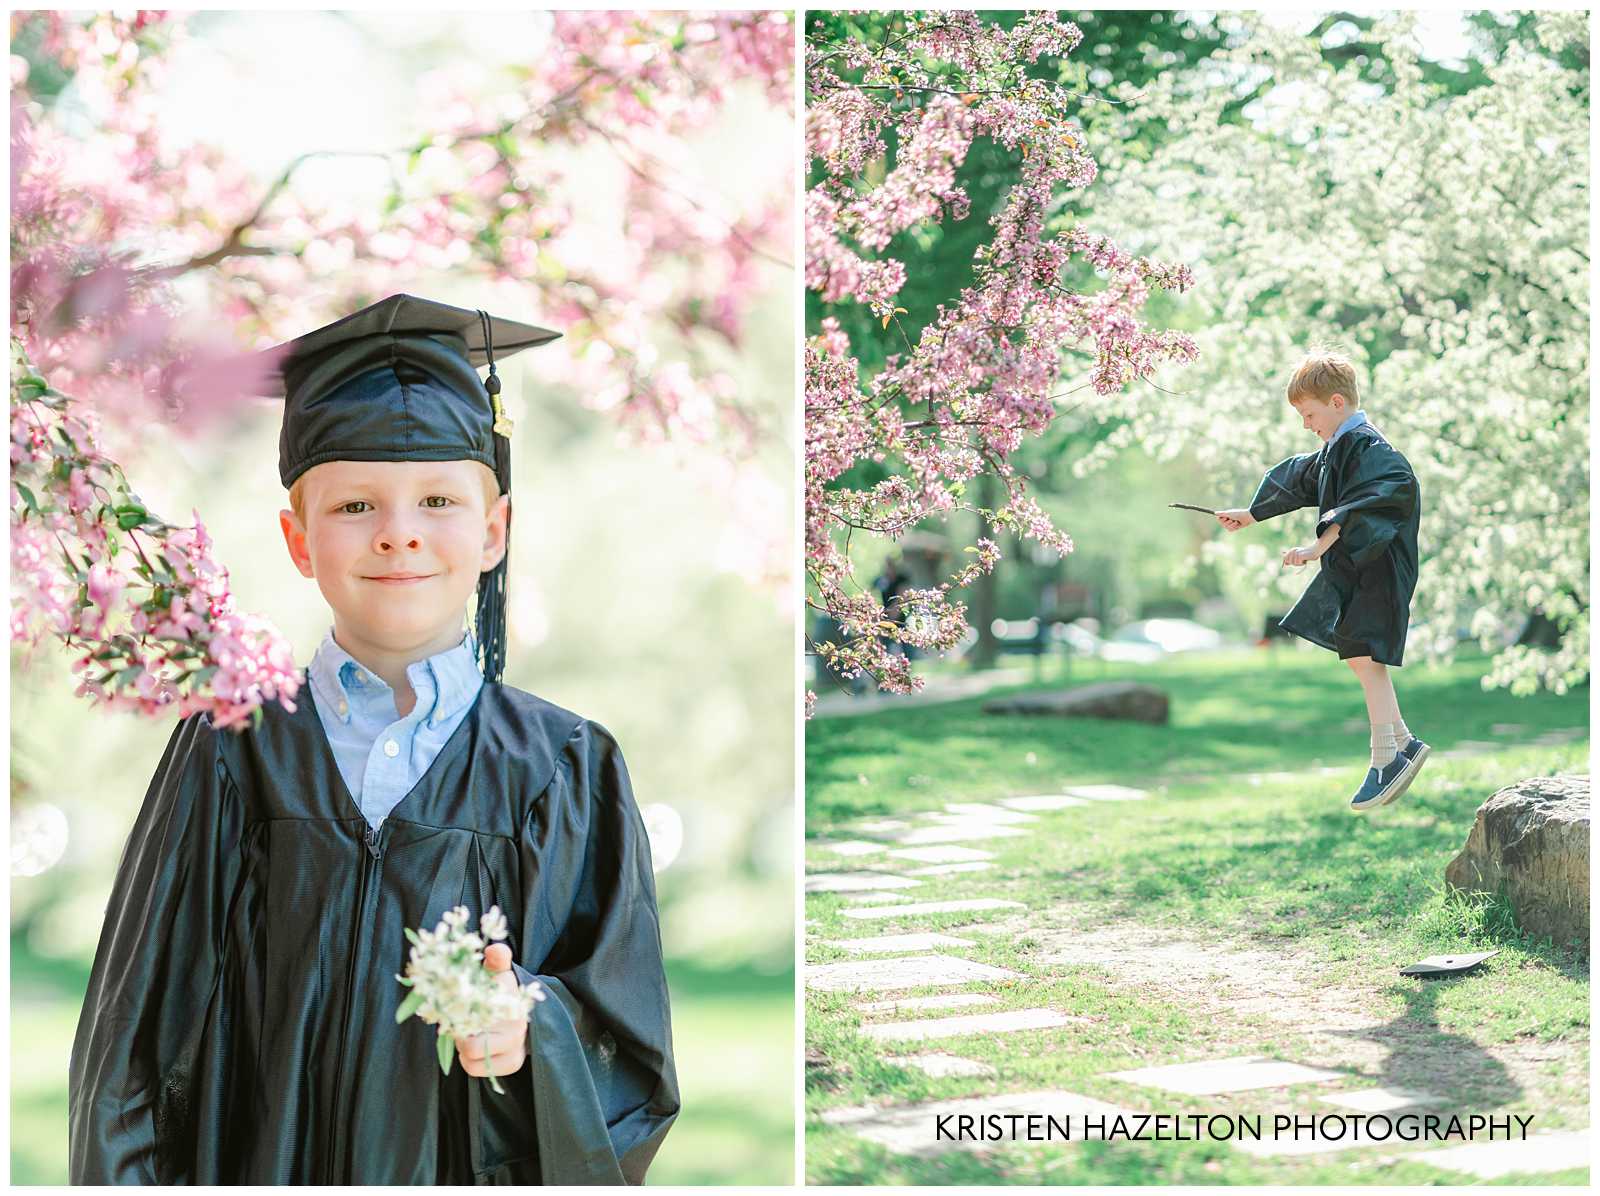 Young boy in graduation robes jumping off a rock